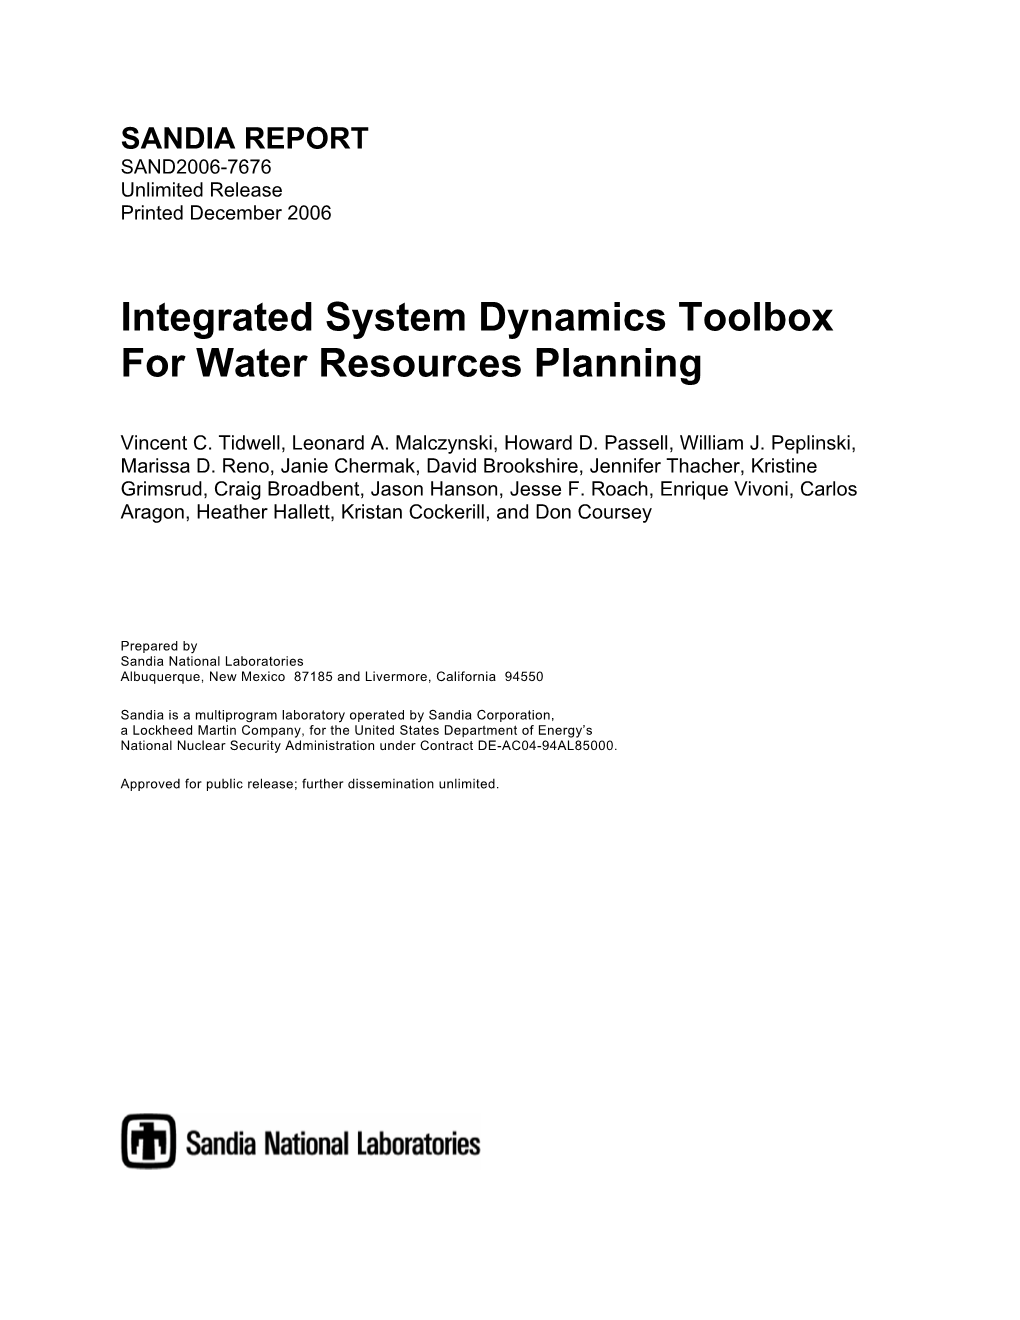 Integrated System Dynamics Toolbox for Water Resources Planning